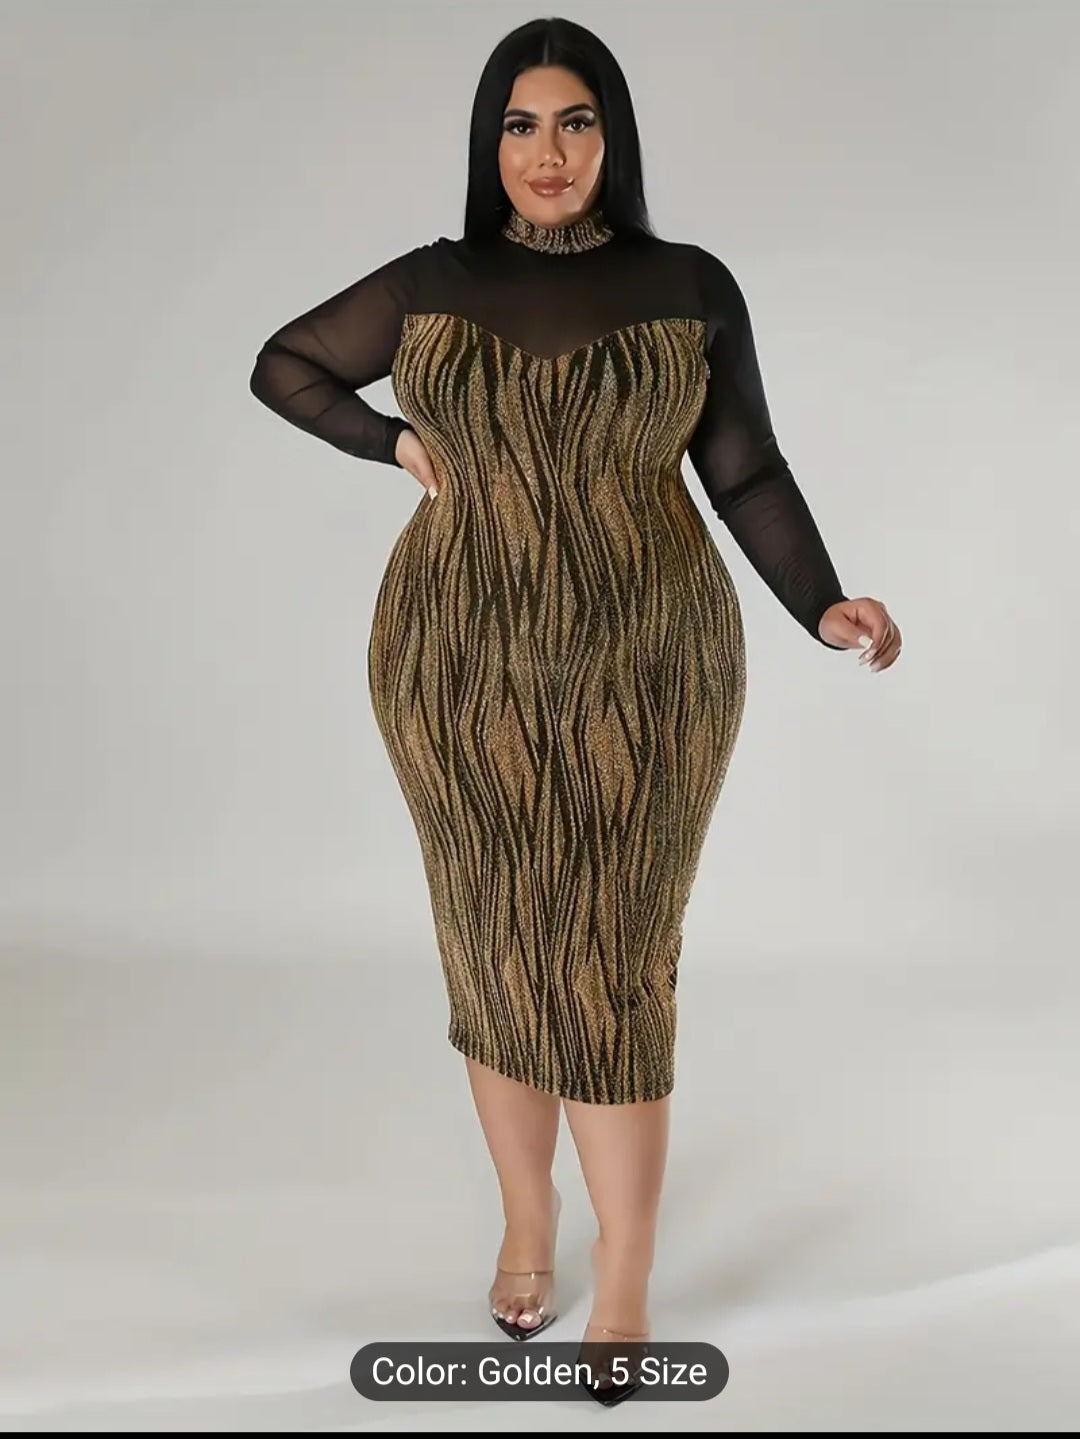 New Year New Me Dress | Style Your Curves